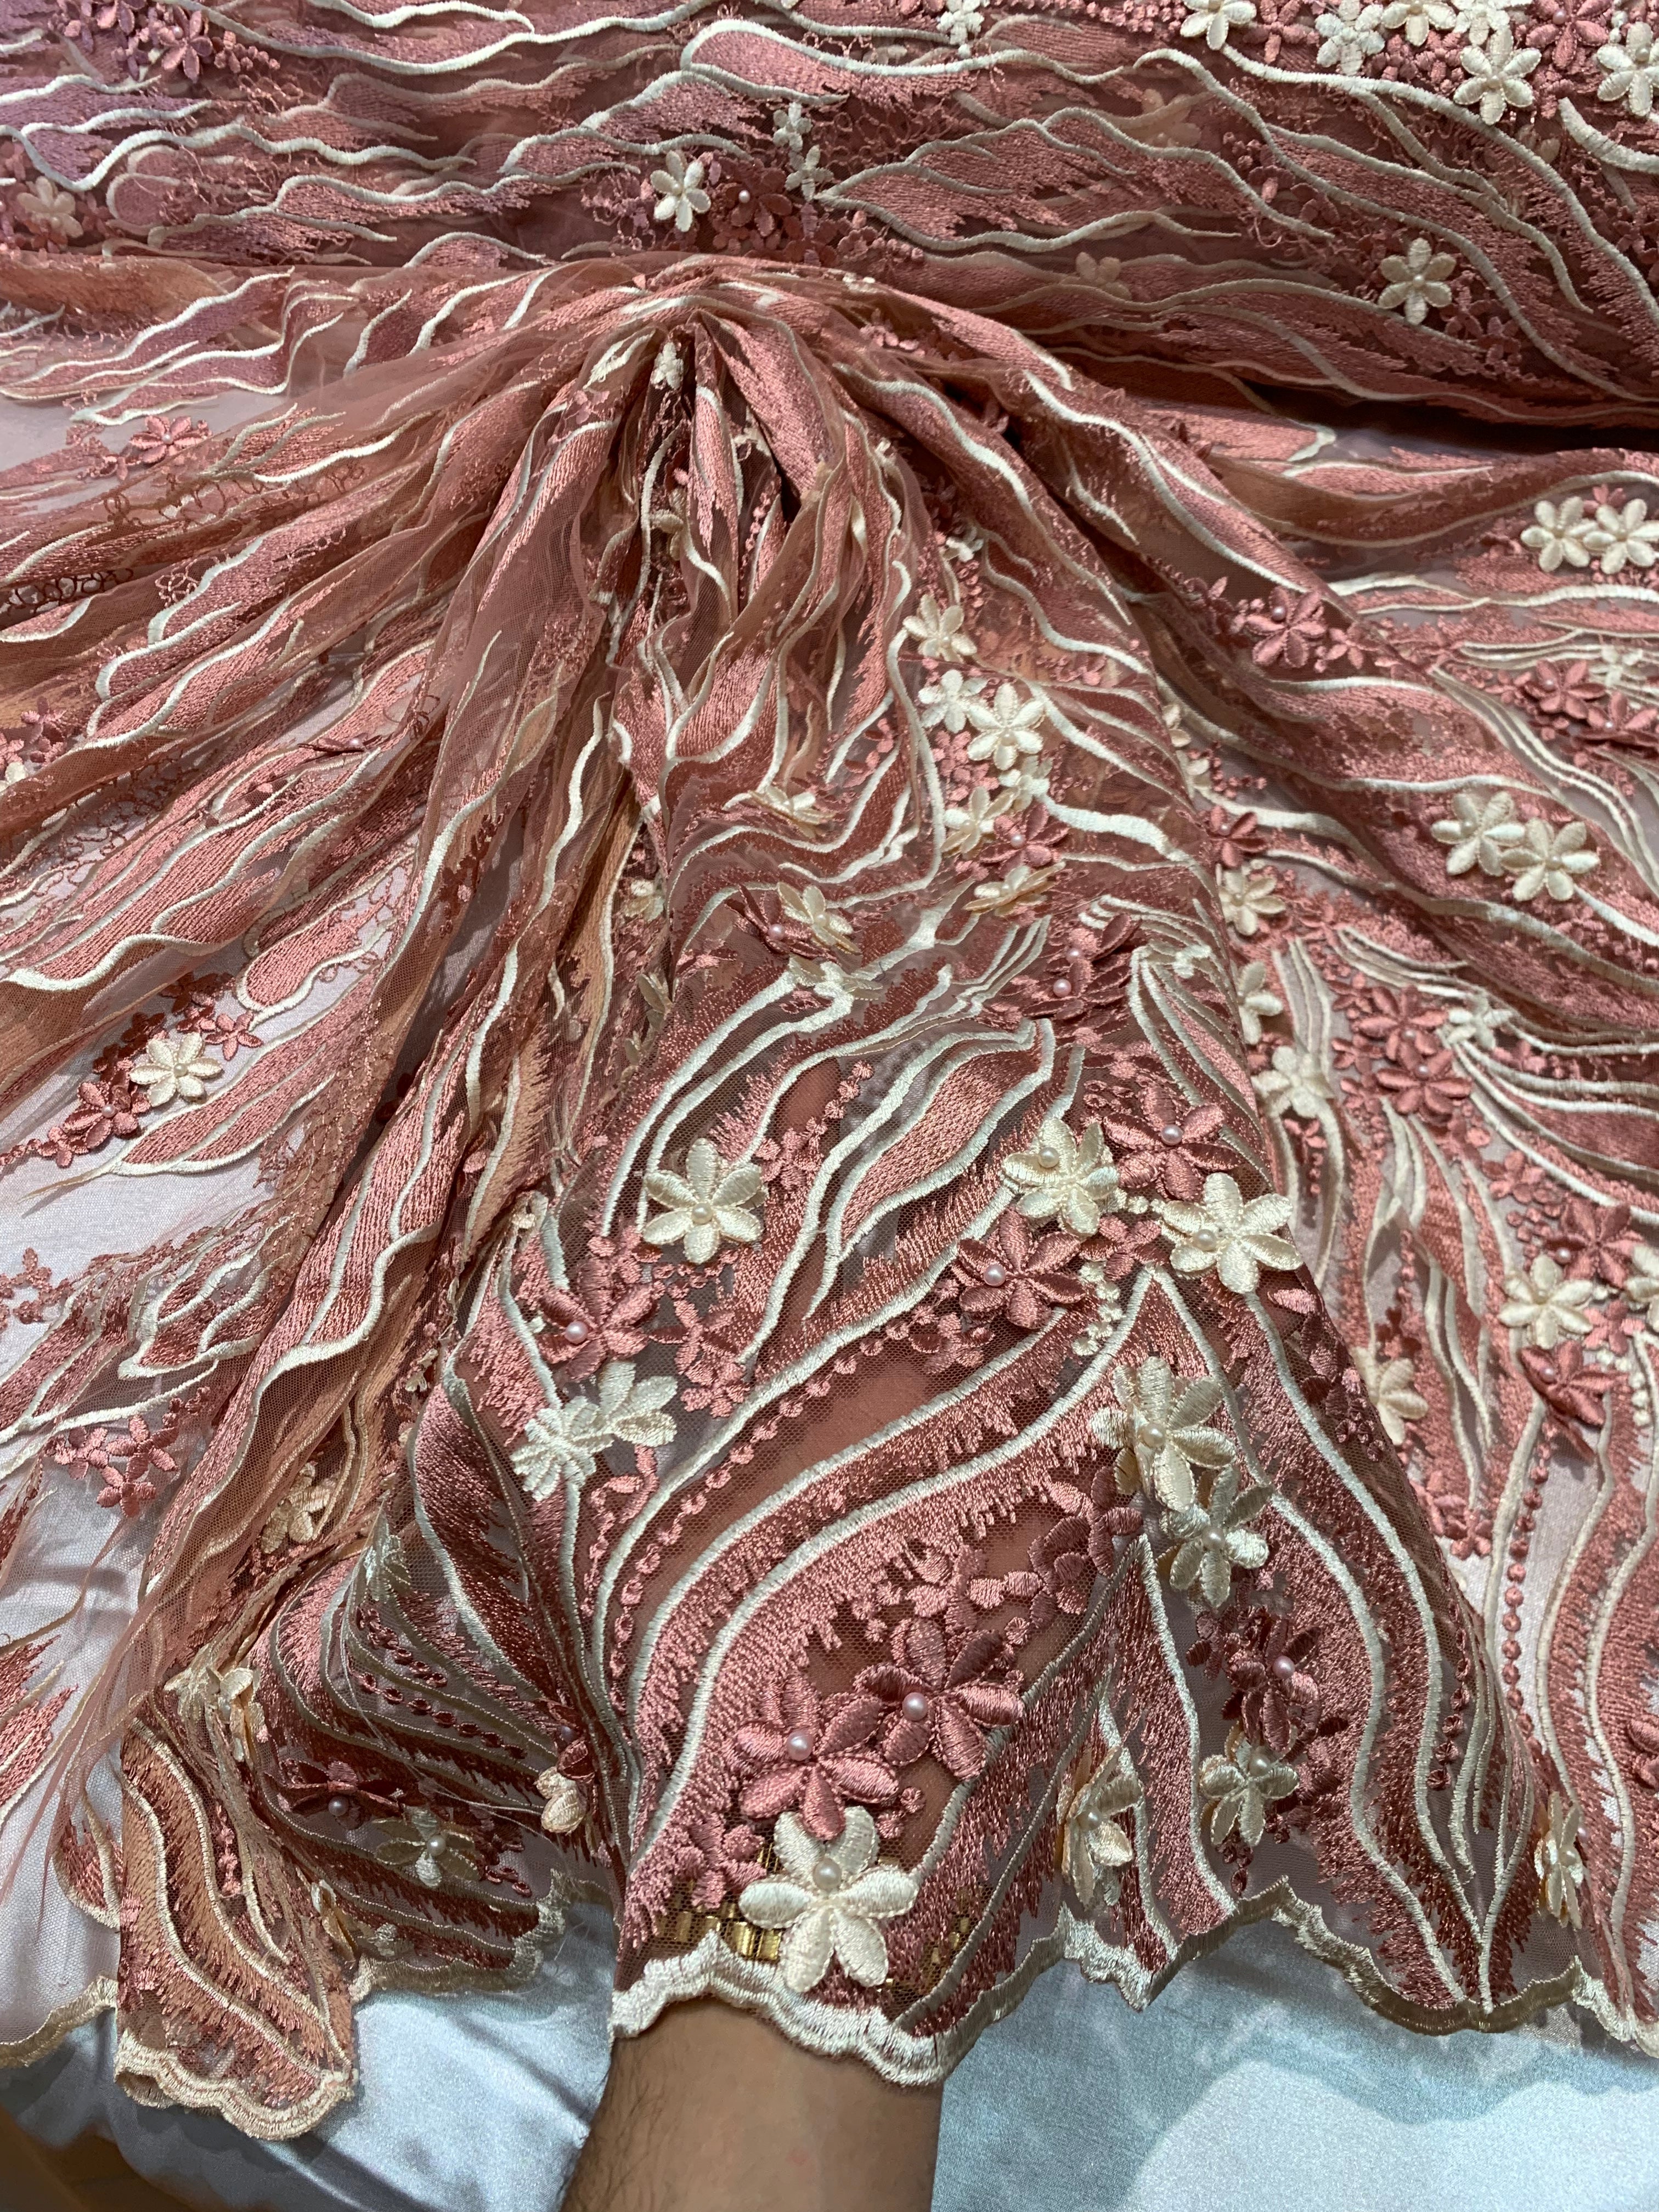 3D FLOWERS Hand Beaded Mesh Lace Fabric Embroidery Lace Fabric By The Yard/Floral Embroidered Handmade/Gowns/ Dress/ Tablecloths/ICEFABRICICE FABRICSDusty Rose3D FLOWERS Hand Beaded Mesh Lace Fabric Embroidery Lace Fabric By The Yard/Floral Embroidered Handmade/Gowns/ Dress/ Tablecloths/ ICEFABRIC |Dusty Rose